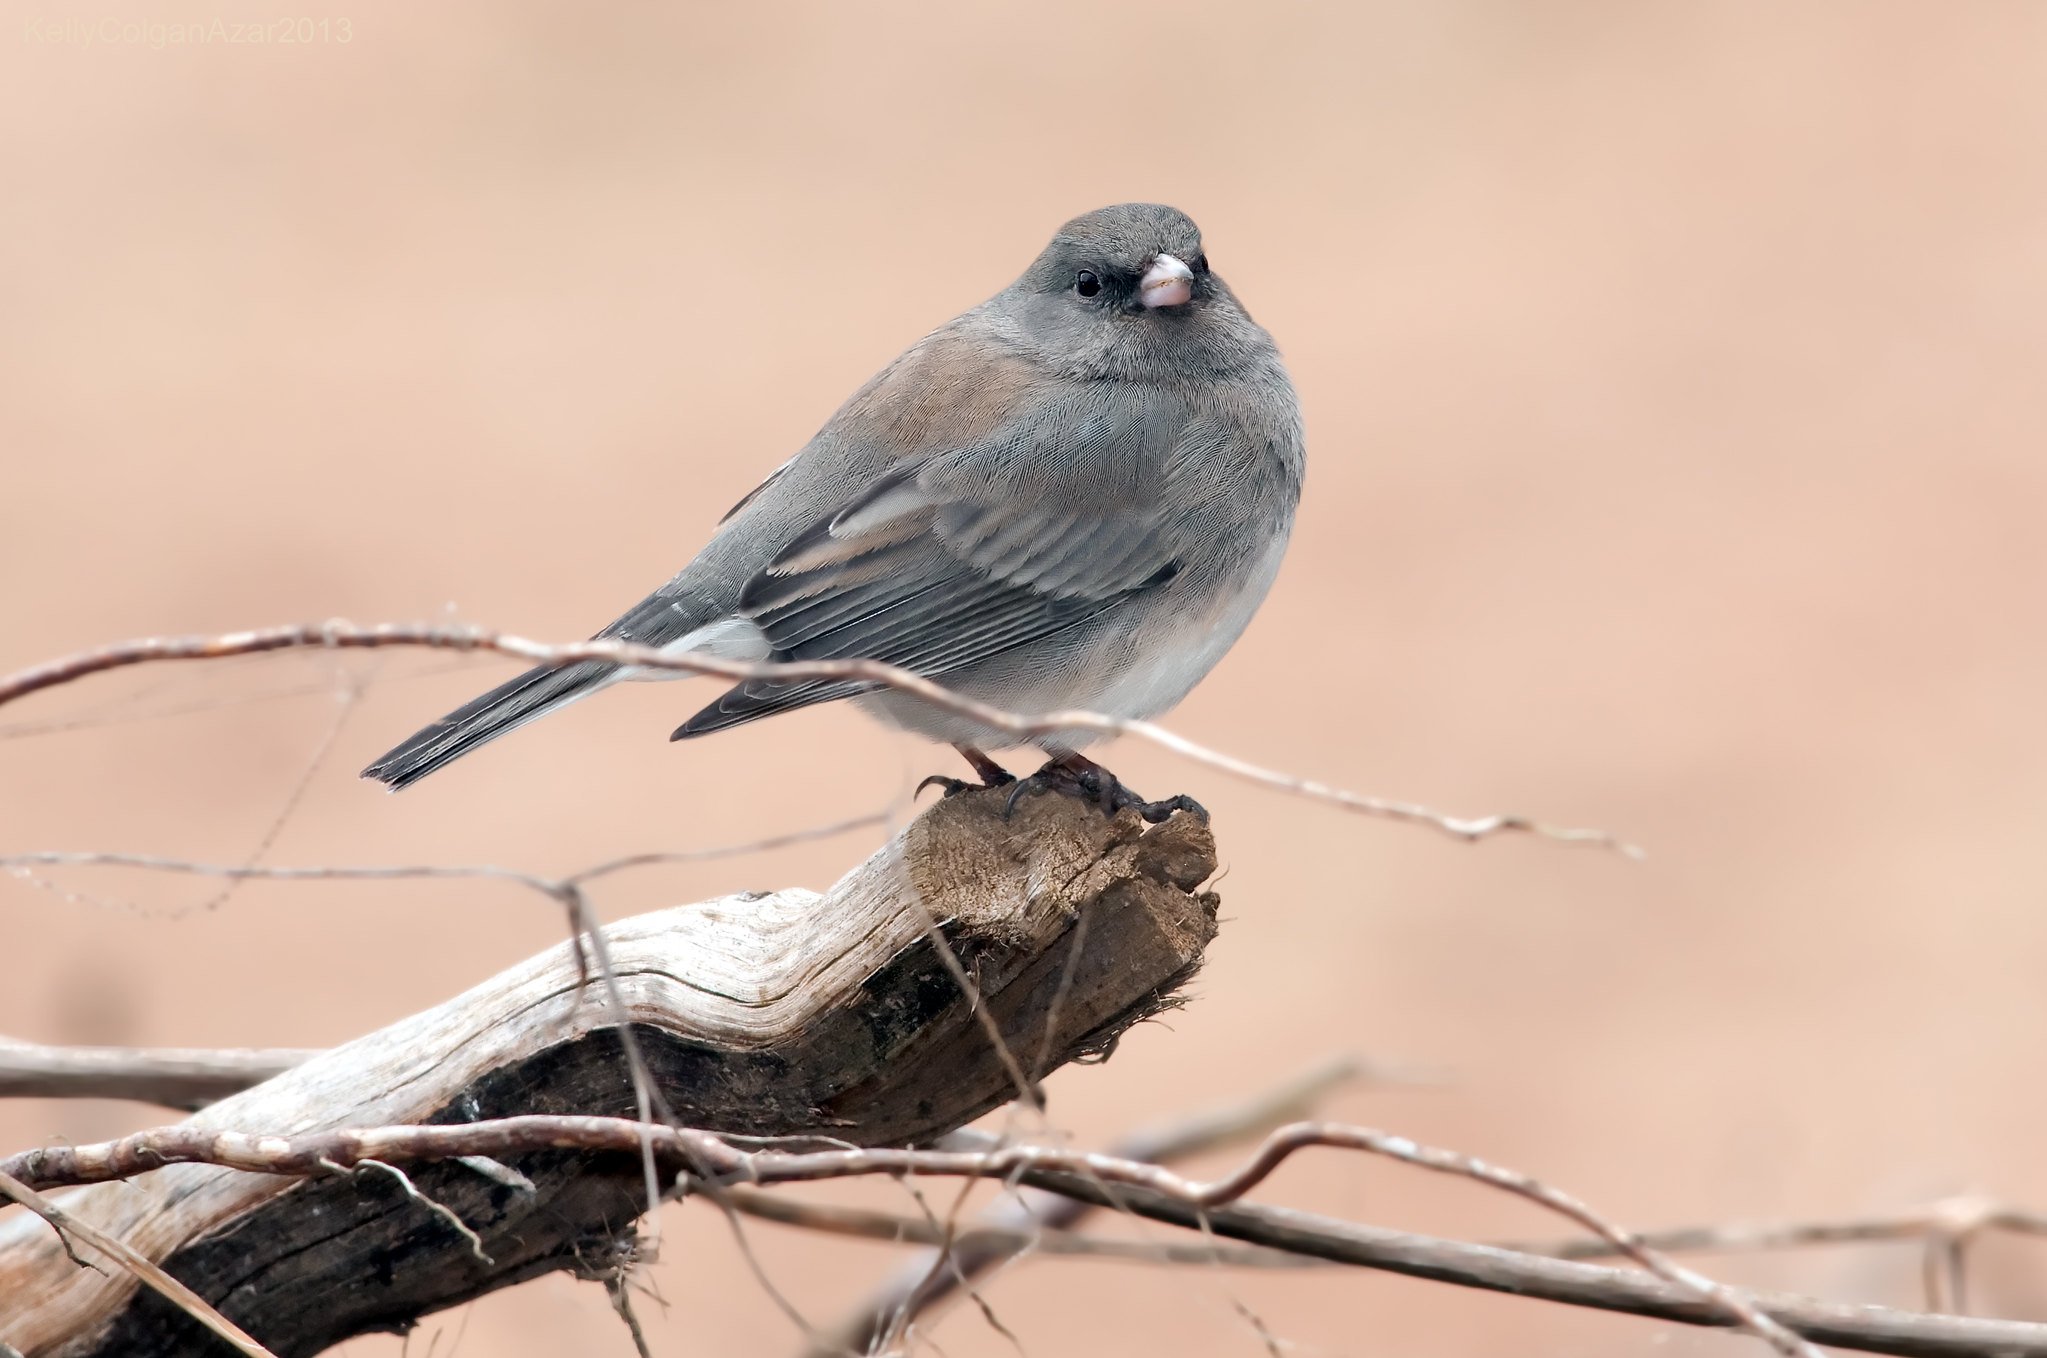 A small gray bird on a twig with a beige background.